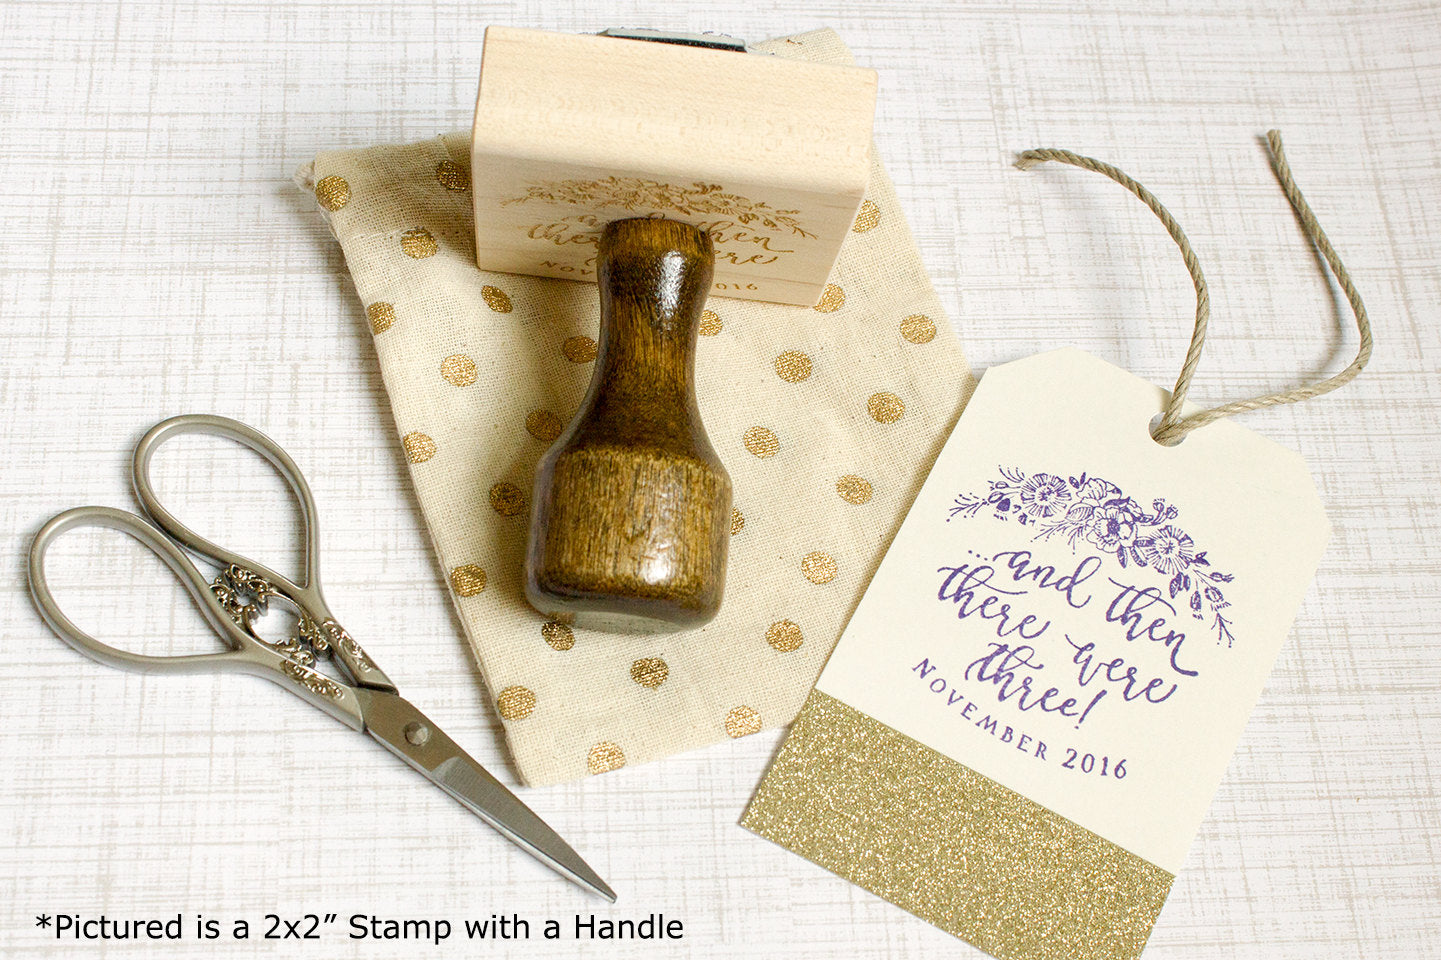 Wedding Rubber Stamp for Wedding Favors, Napkins, Cards. Custom Rubber Stamp, DIY Wedding Stamp, Botanical. Custom Stamp 2 to 4 Inch - W35